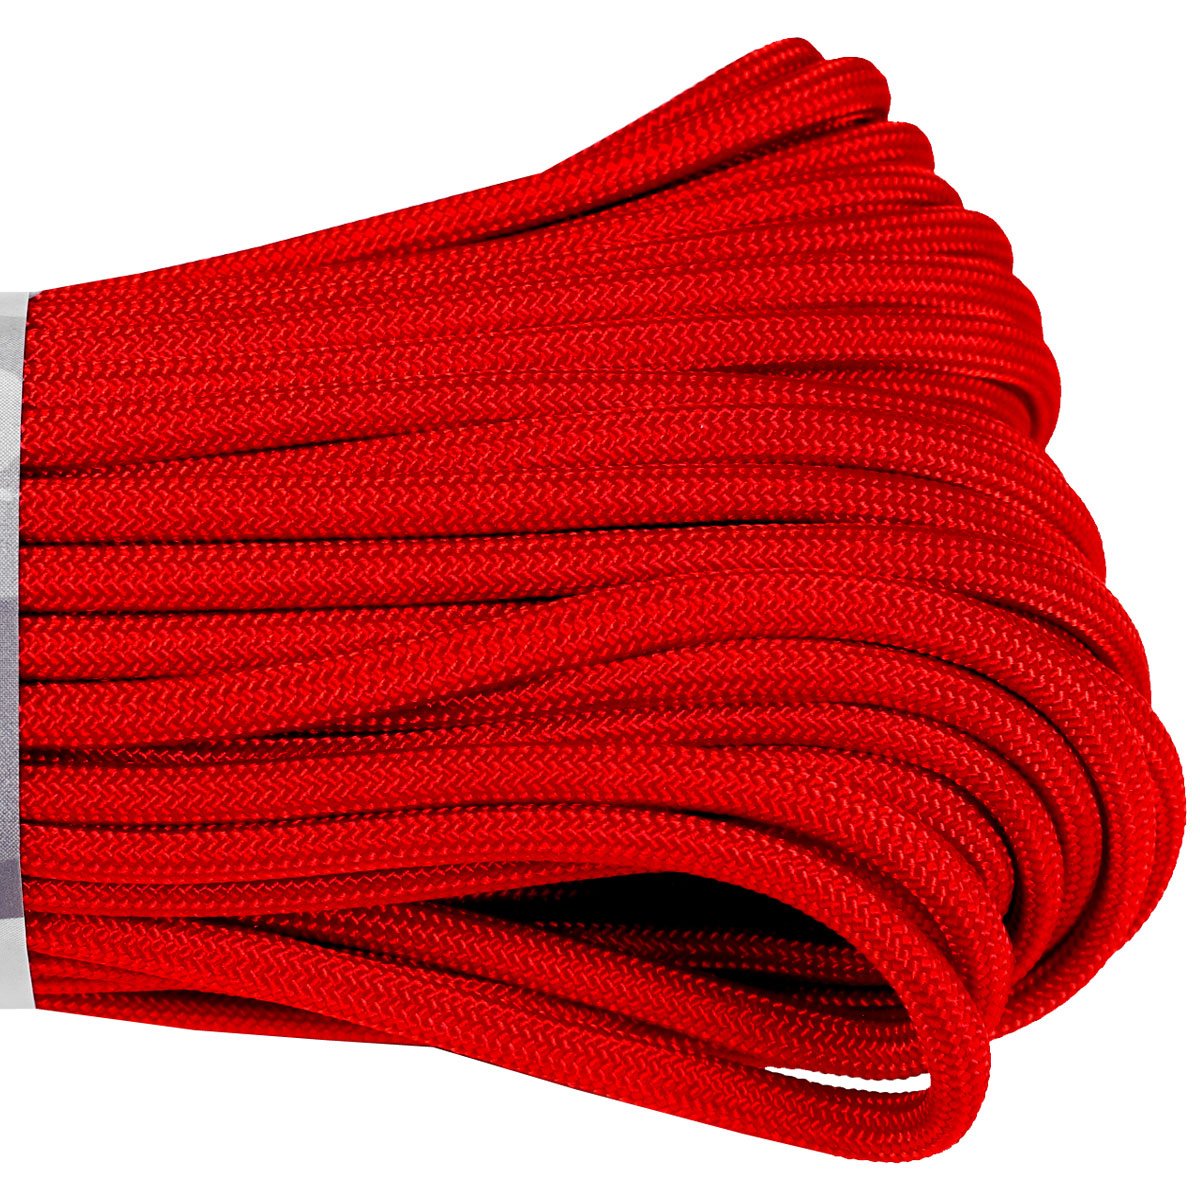 Atwood 550 Paracord - Red